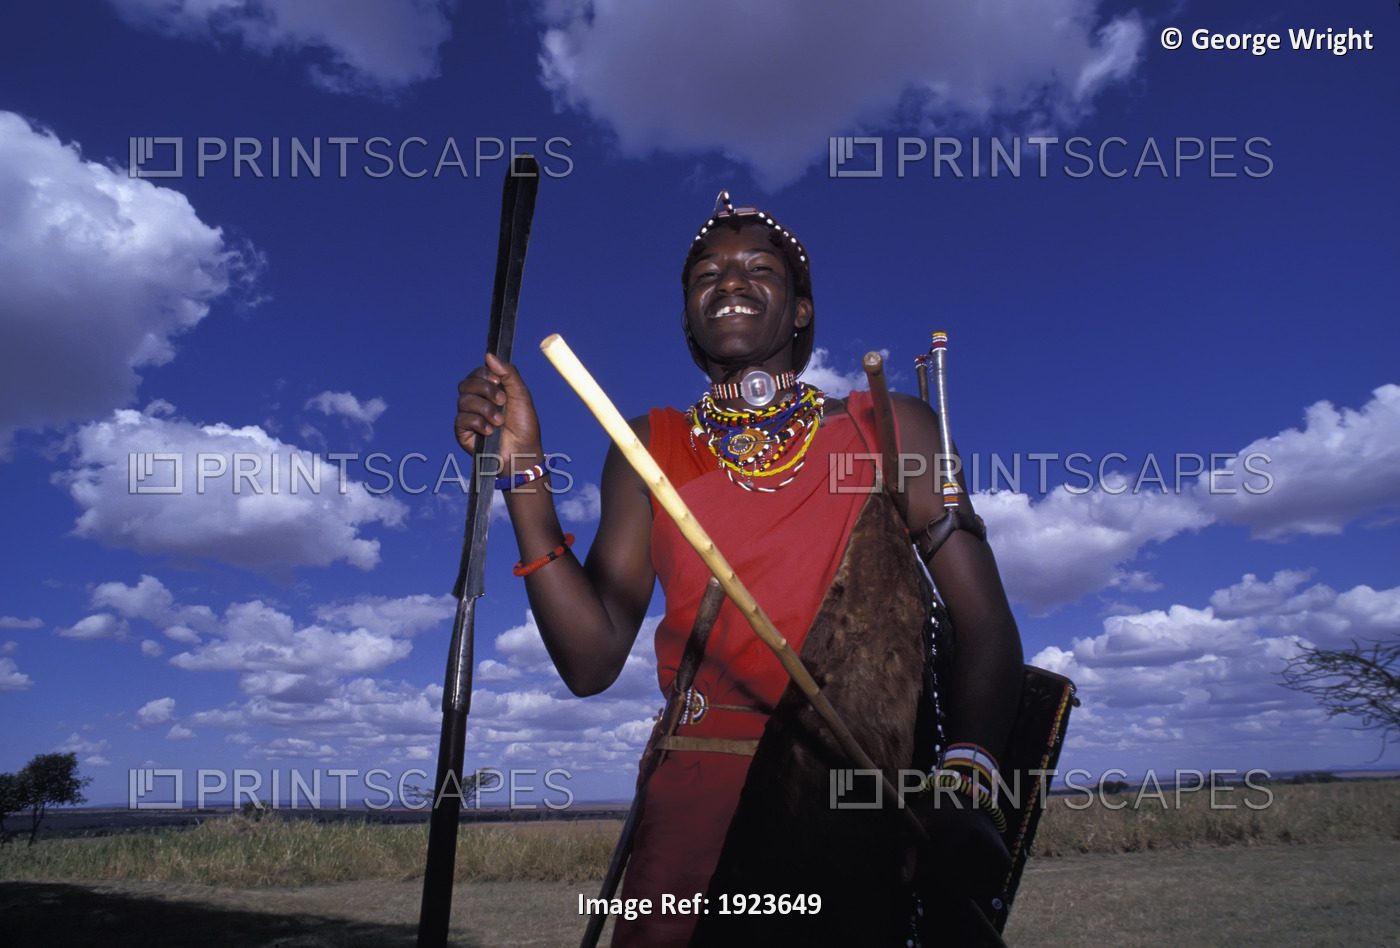 Tribal man stands posing with a smile, wearing traditional clothing and holding ...